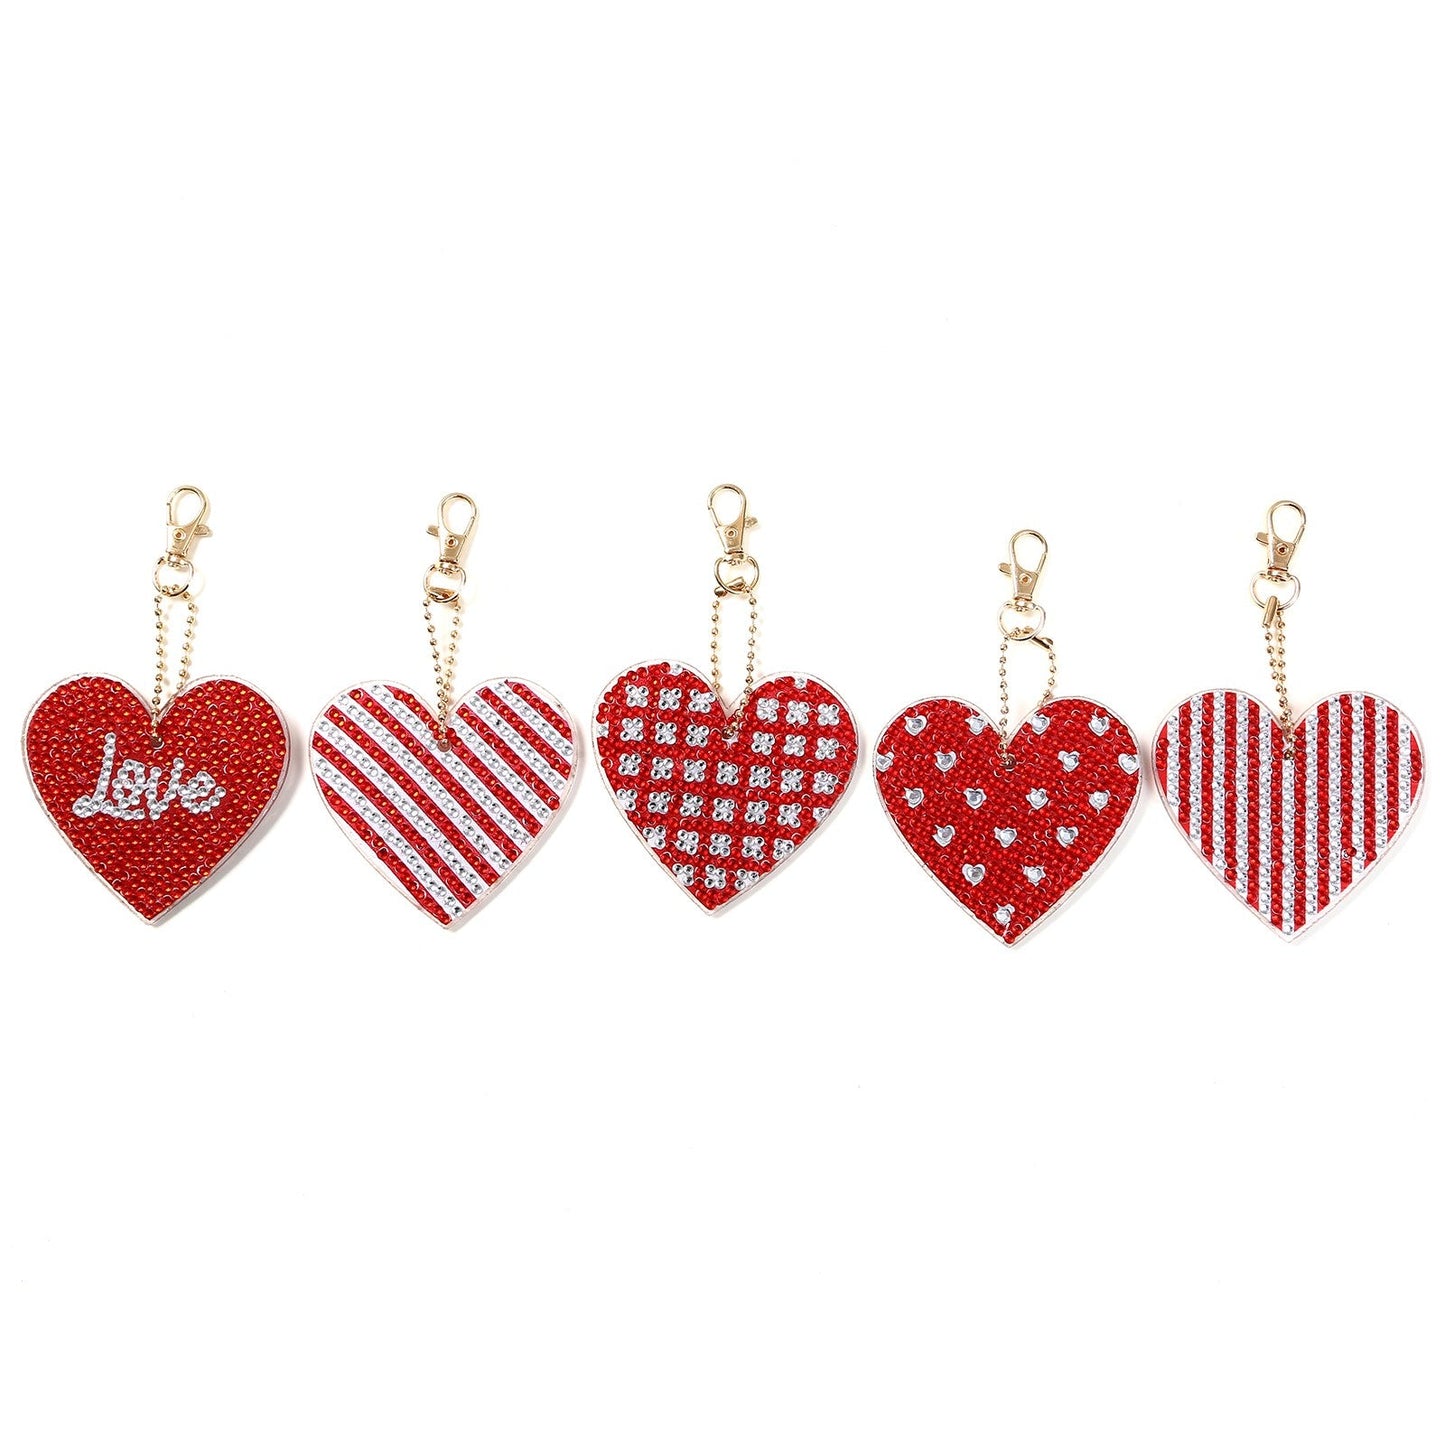 Blingbling's Keychain | Love | Five Piece Set